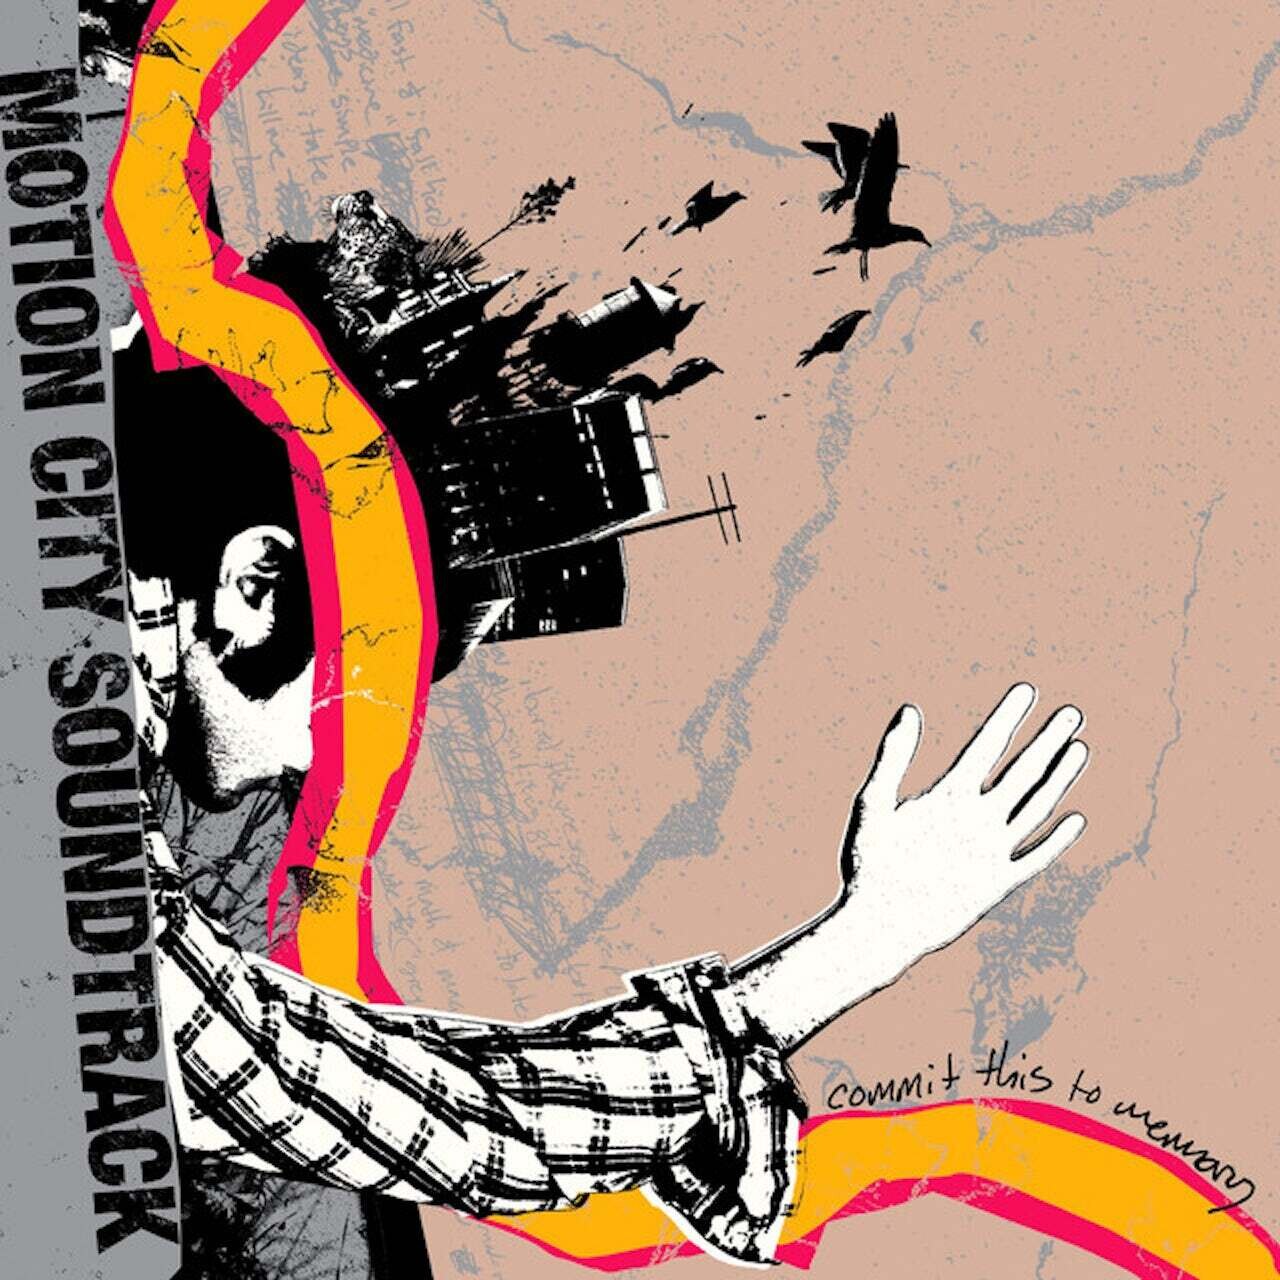 Motion City Soundtrack / Commit This To Memory